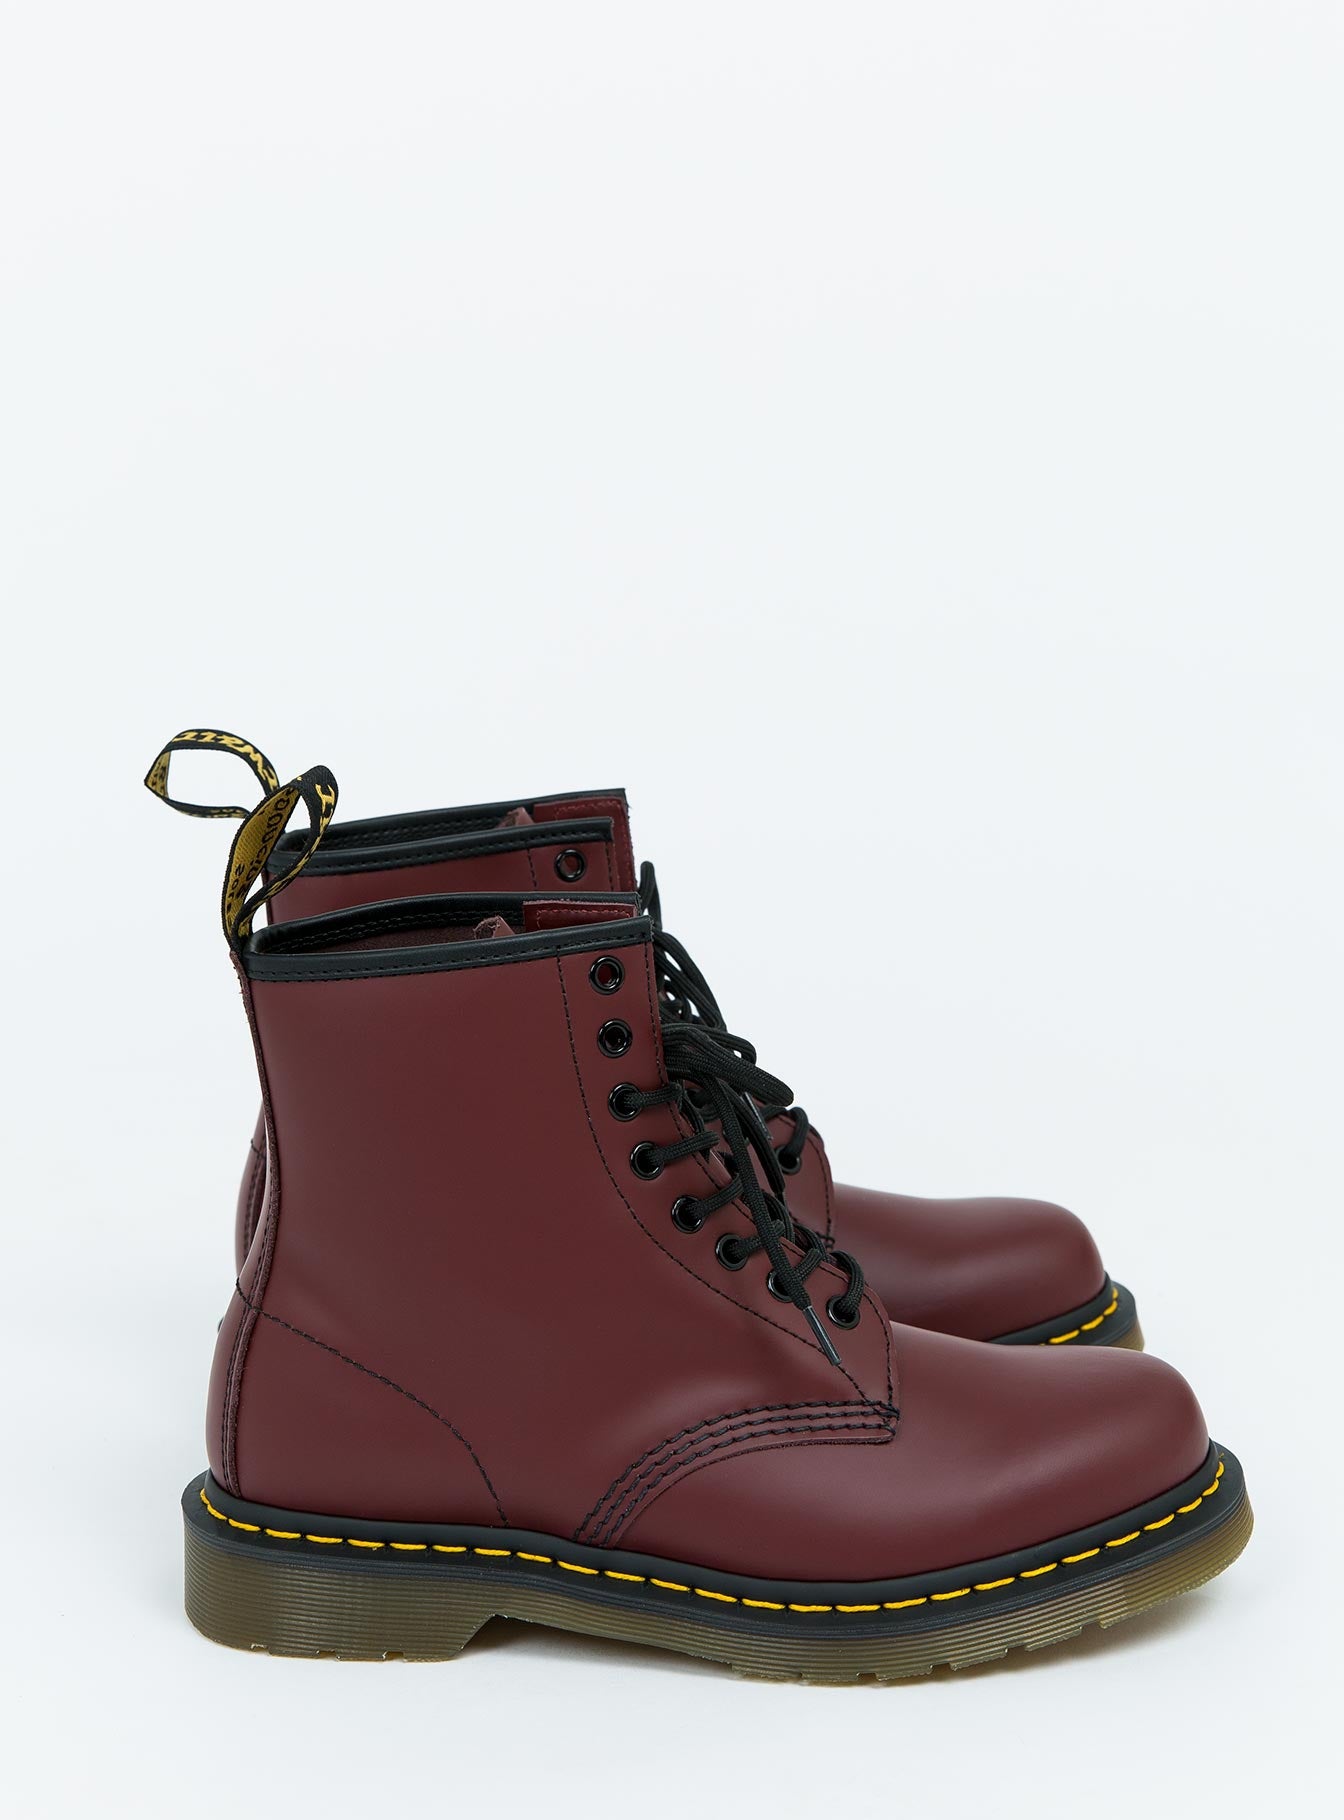 who sells doc martens near me